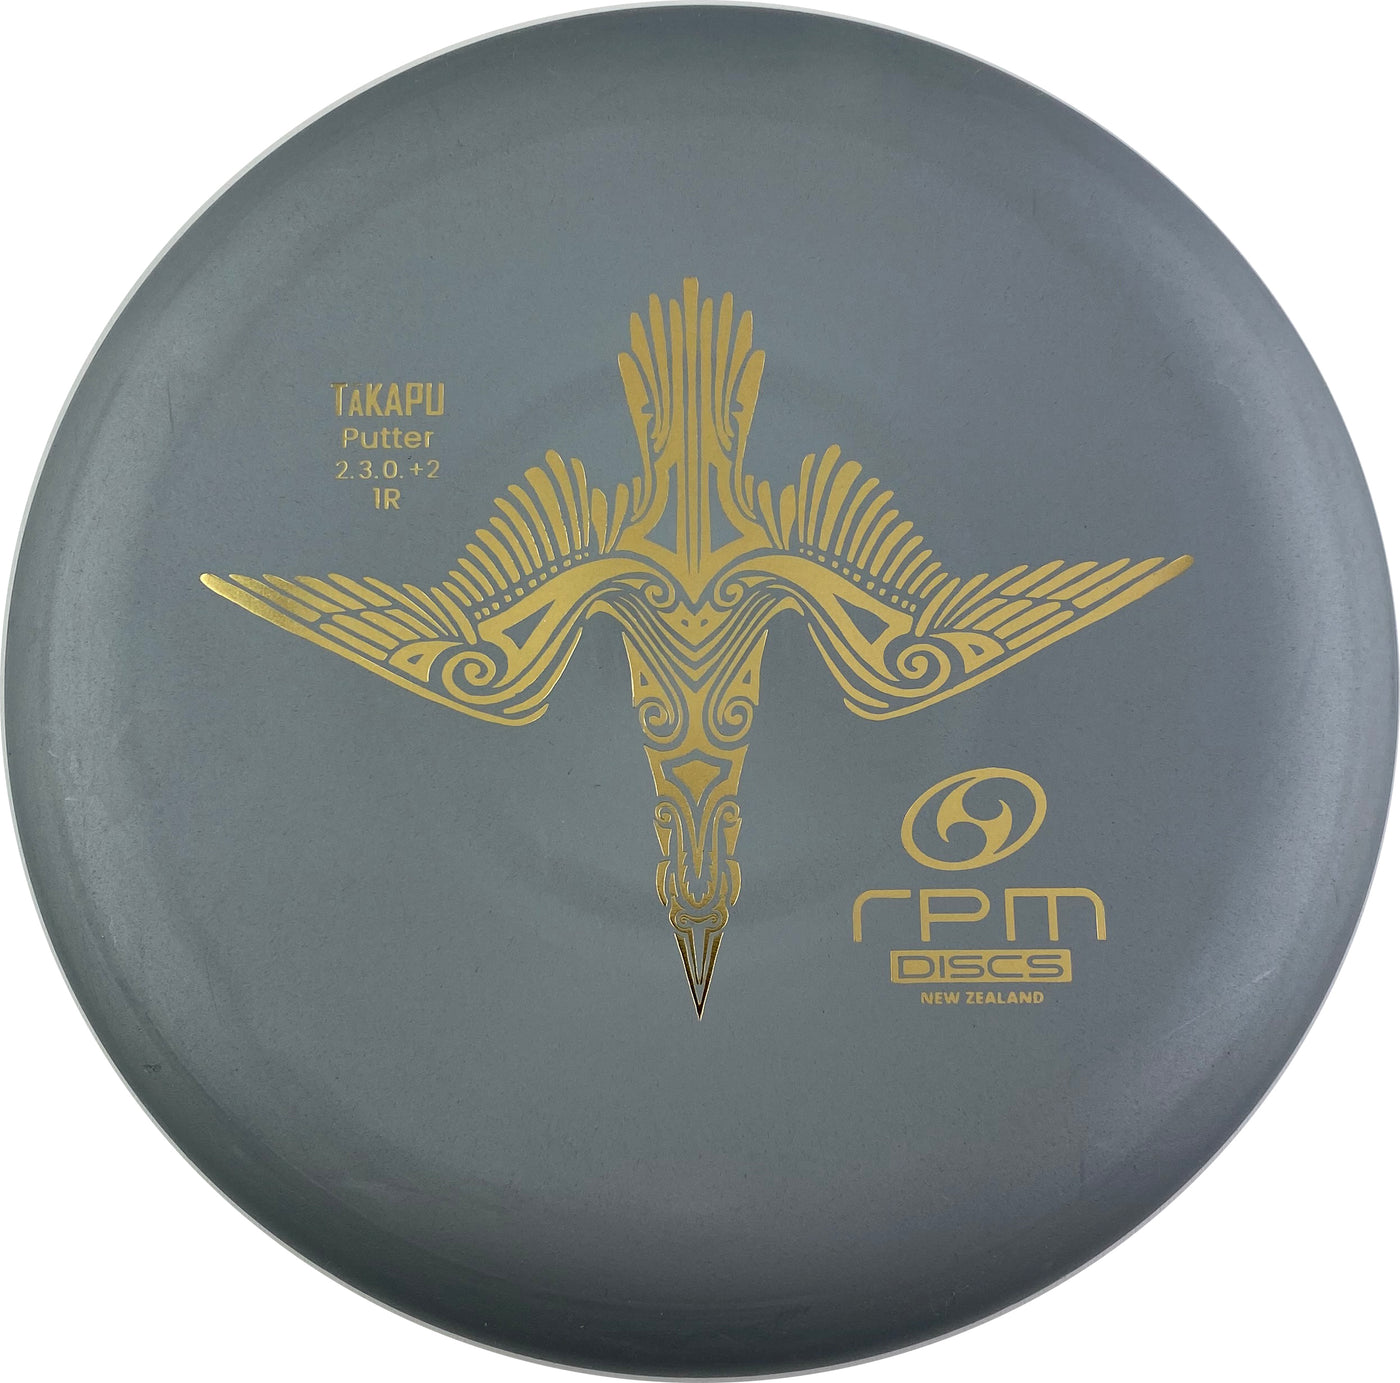 RPM Discs Magma Soft Takapu Putter with 1R - First Run Stamp - Speed 2